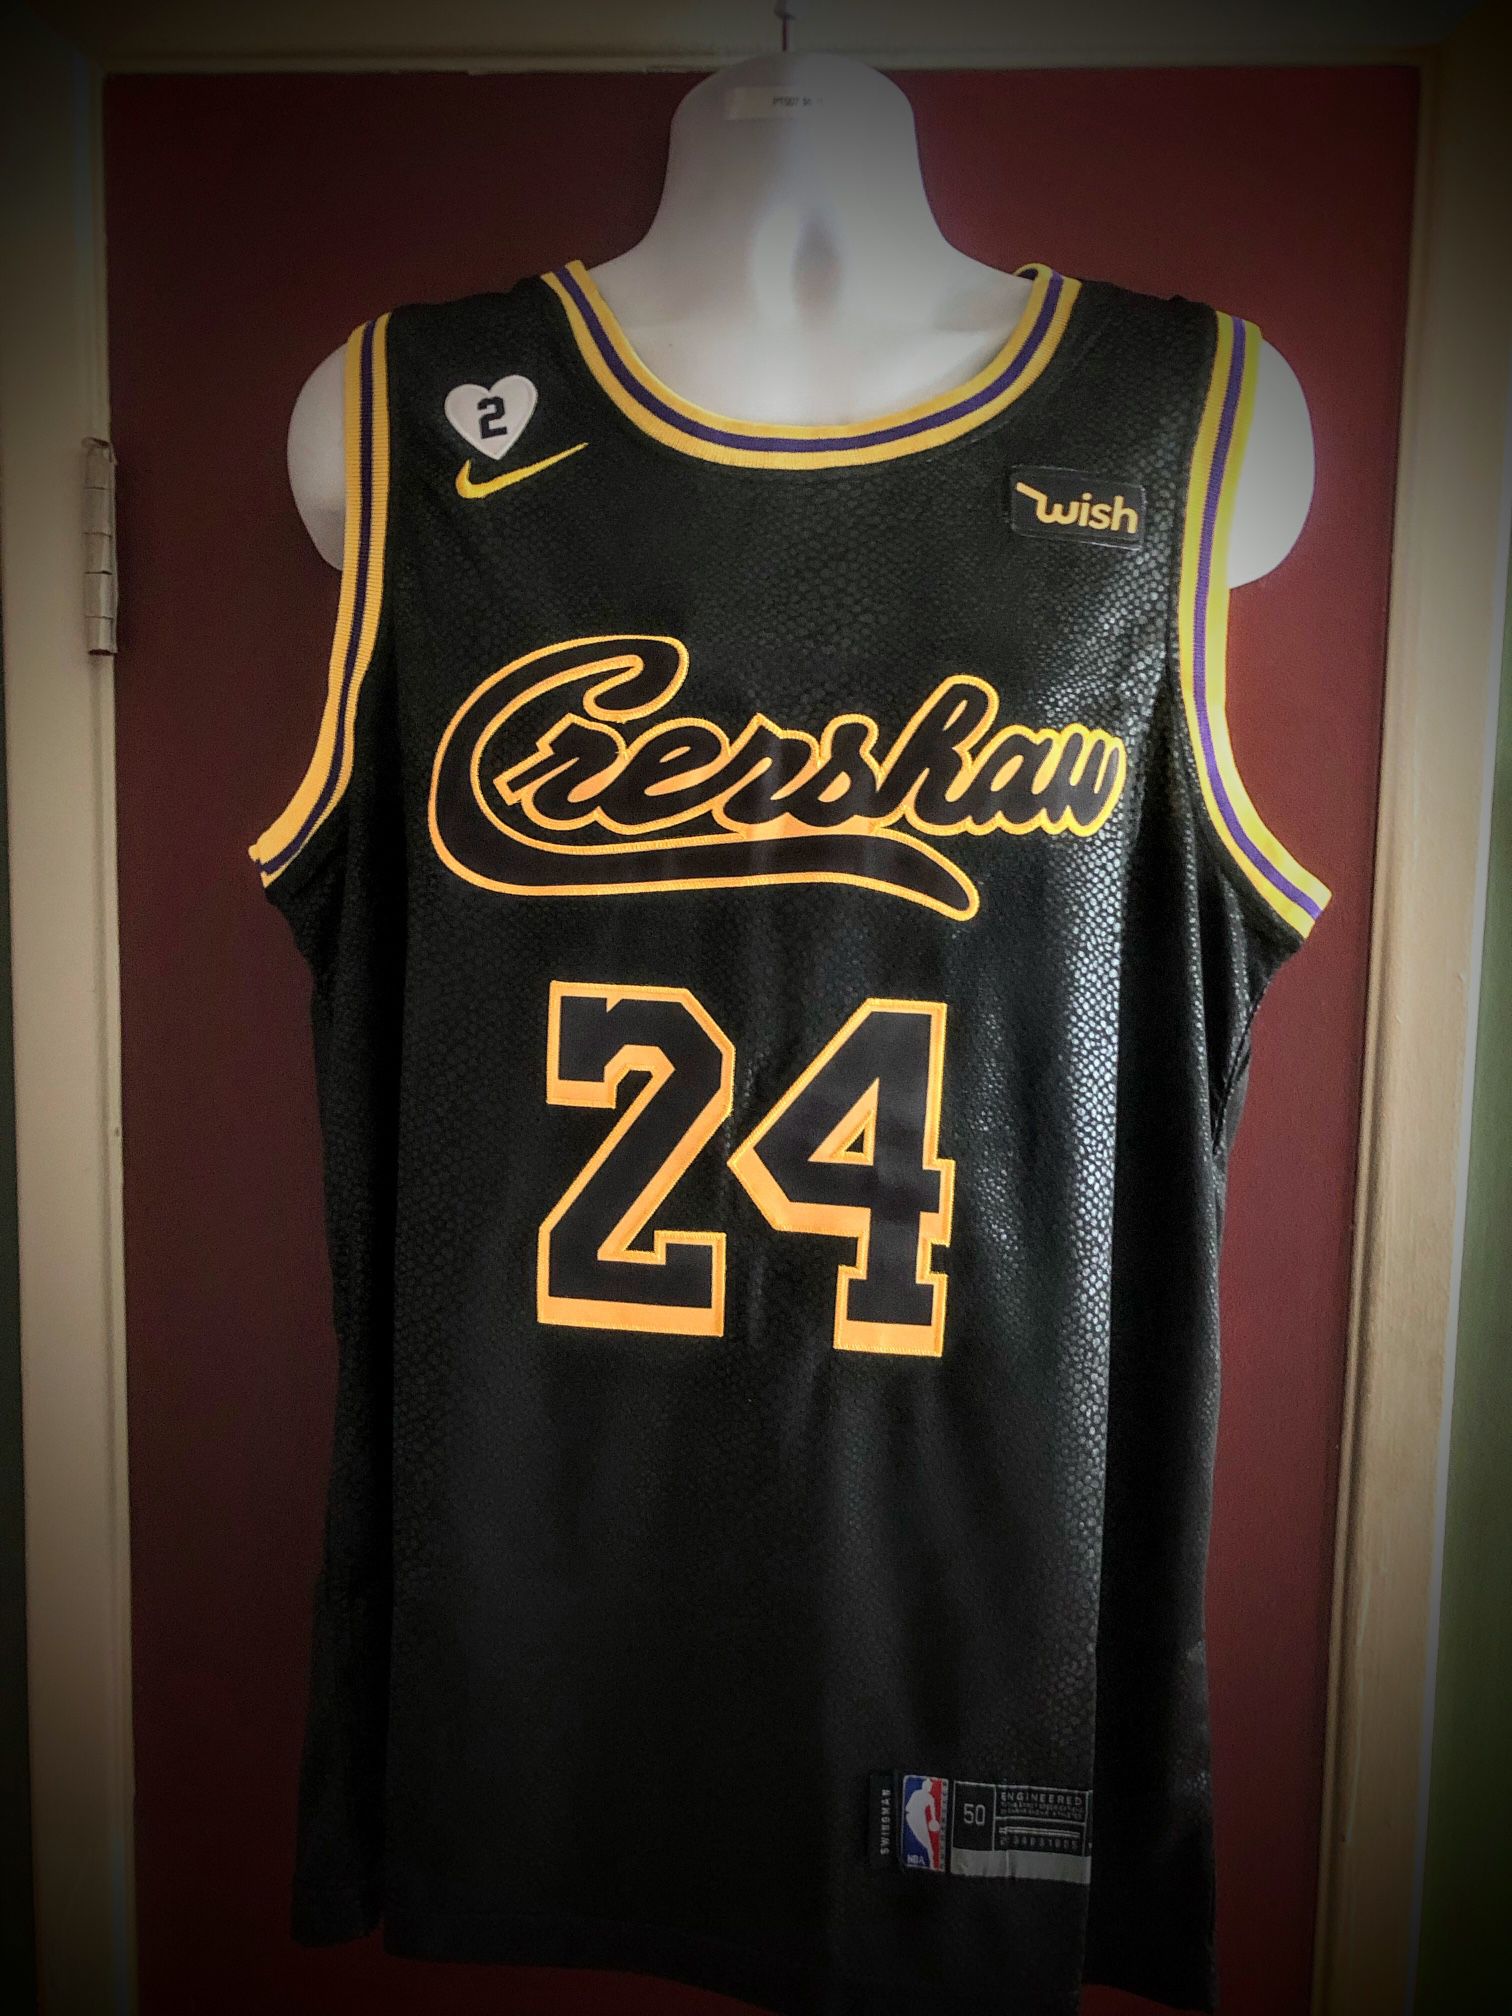 Kobe Bryant x Crenshaw Jersey Size Large. Brand New Tag Attached